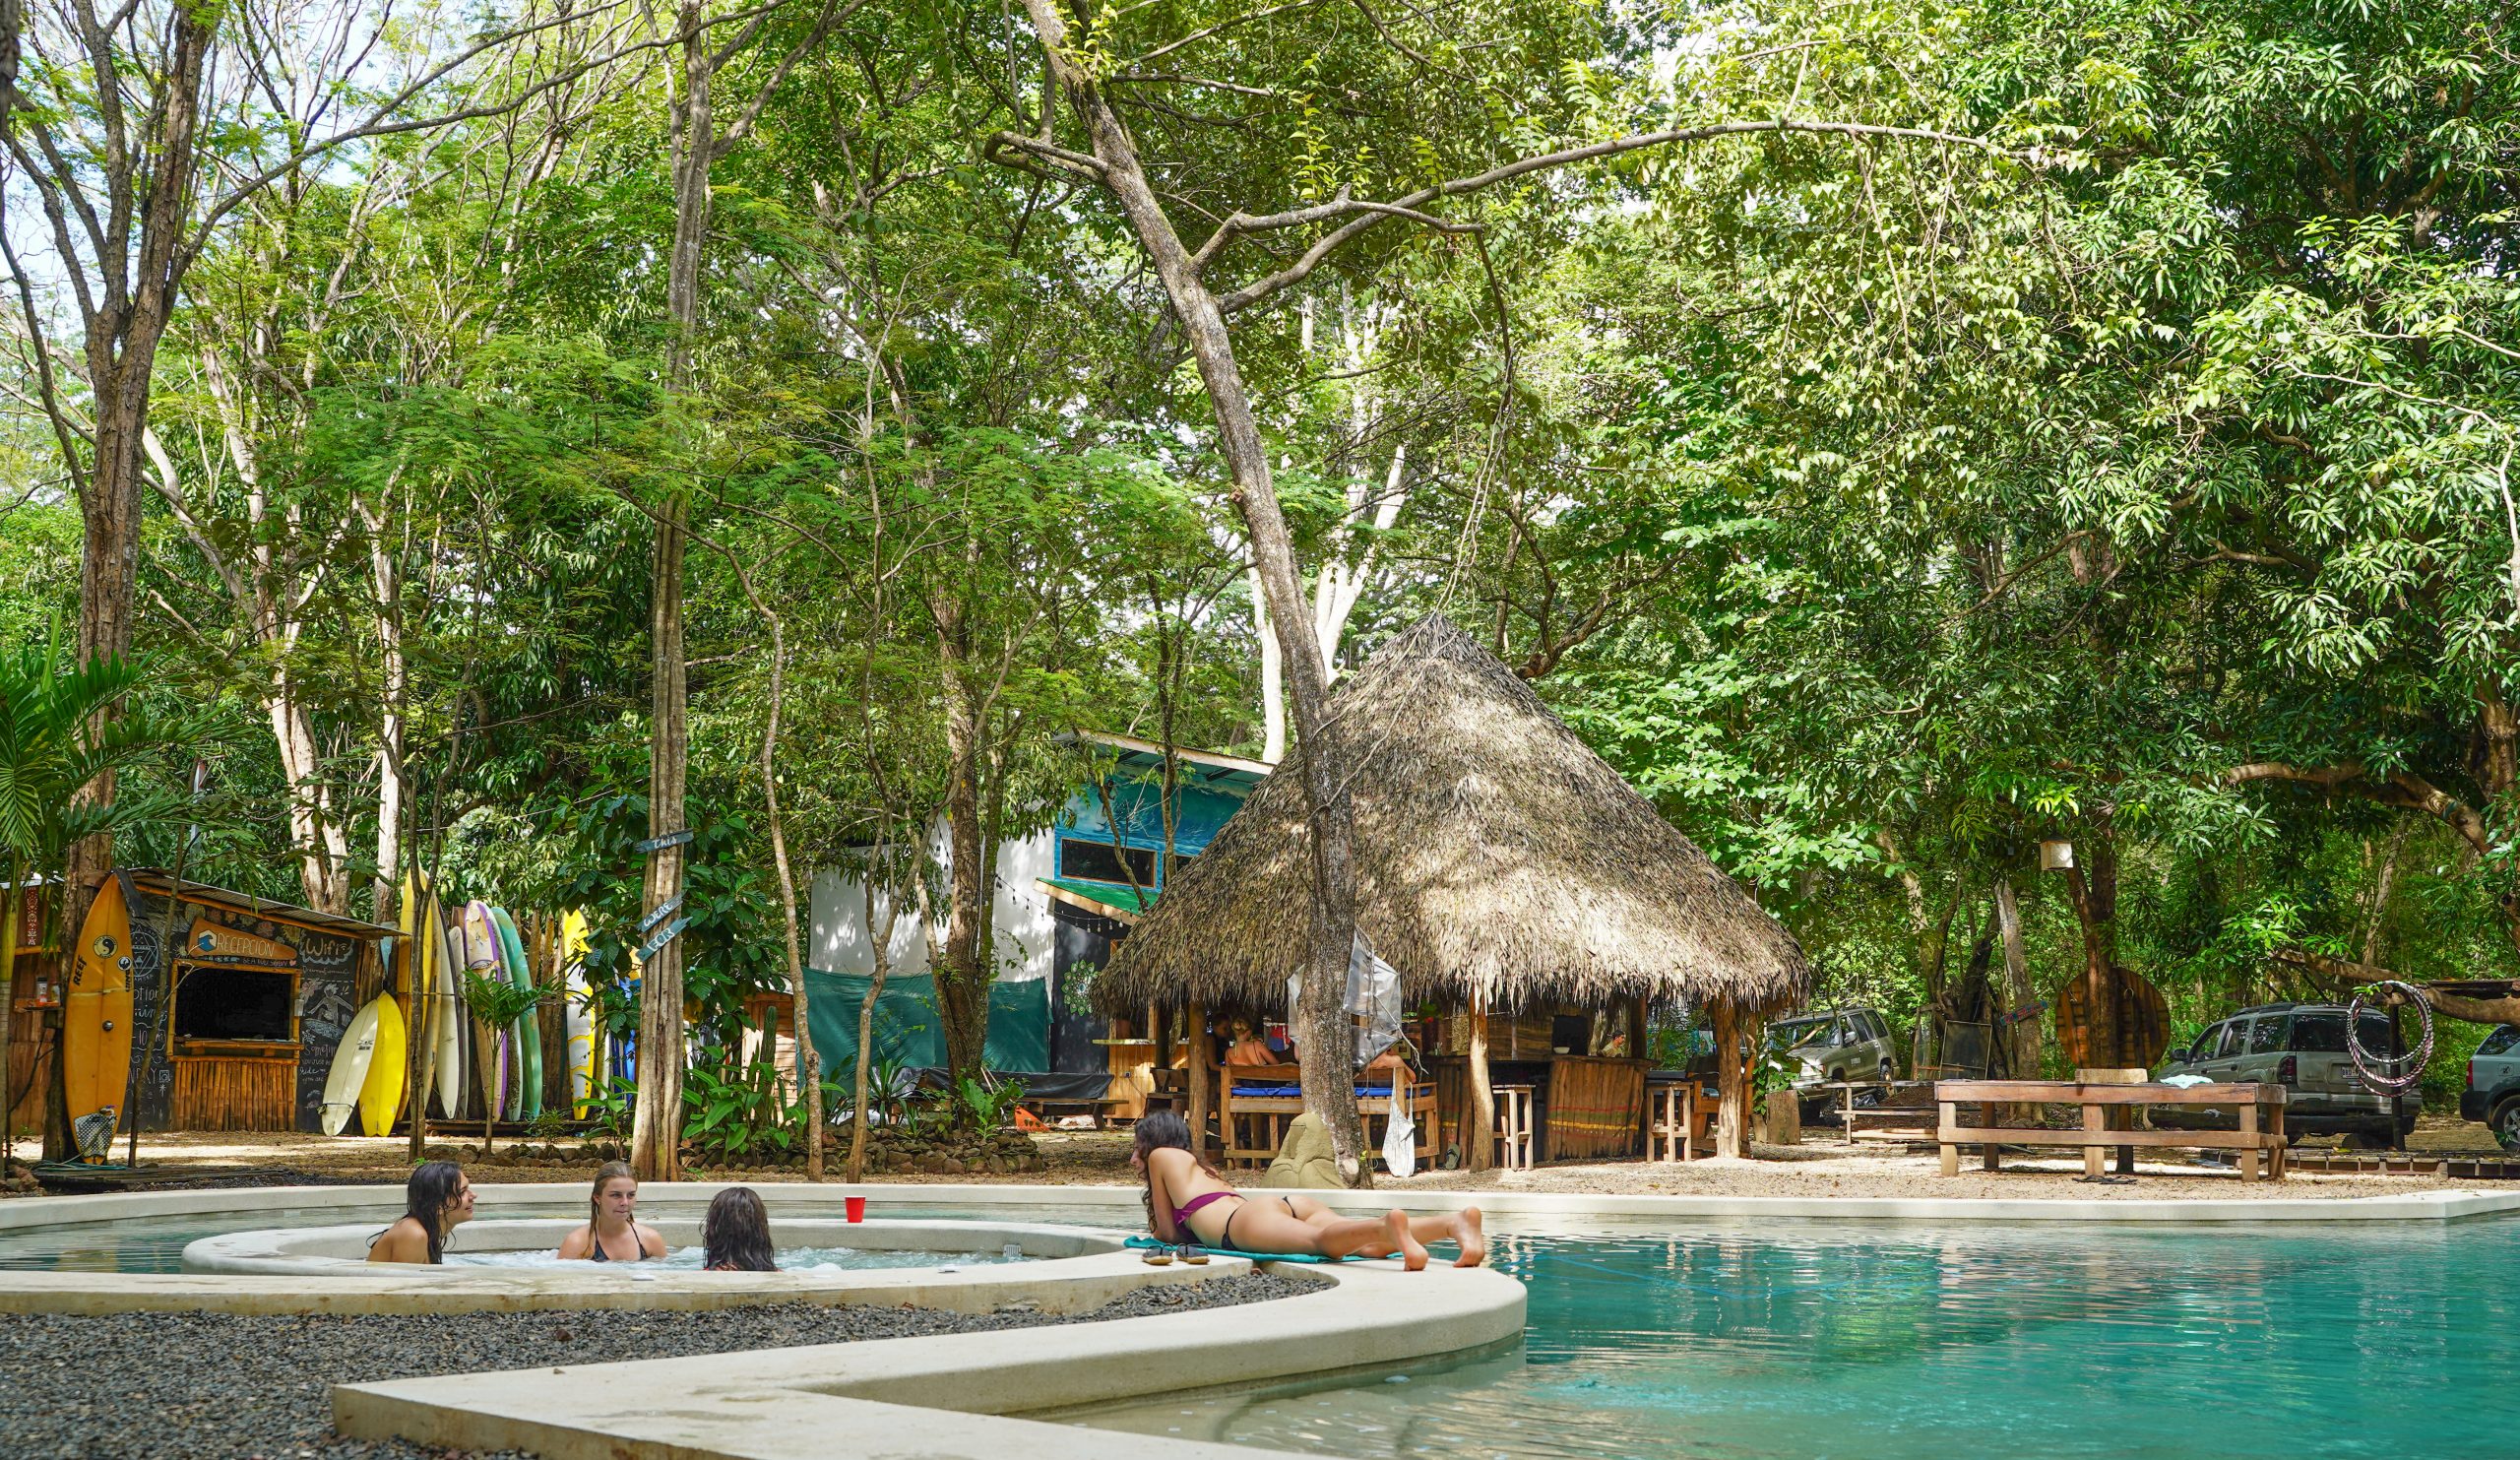 Dreamsea Surf Camp Costa Rica | Picture of pool and accommodations near beach in wilderness